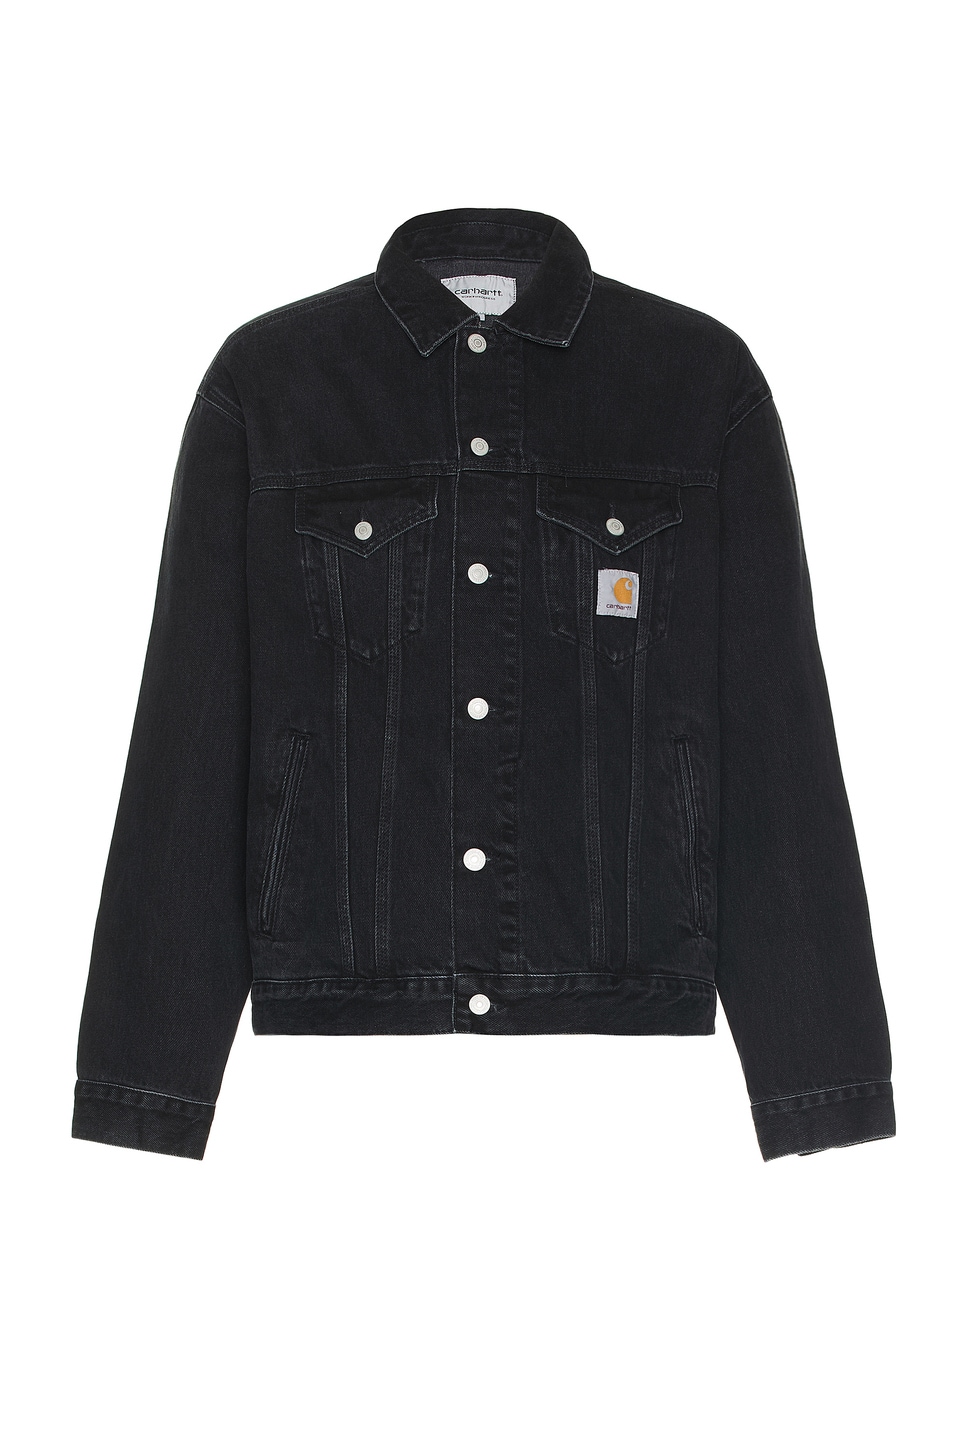 Image 1 of Carhartt WIP Helston Jacket in Black Stone Washed